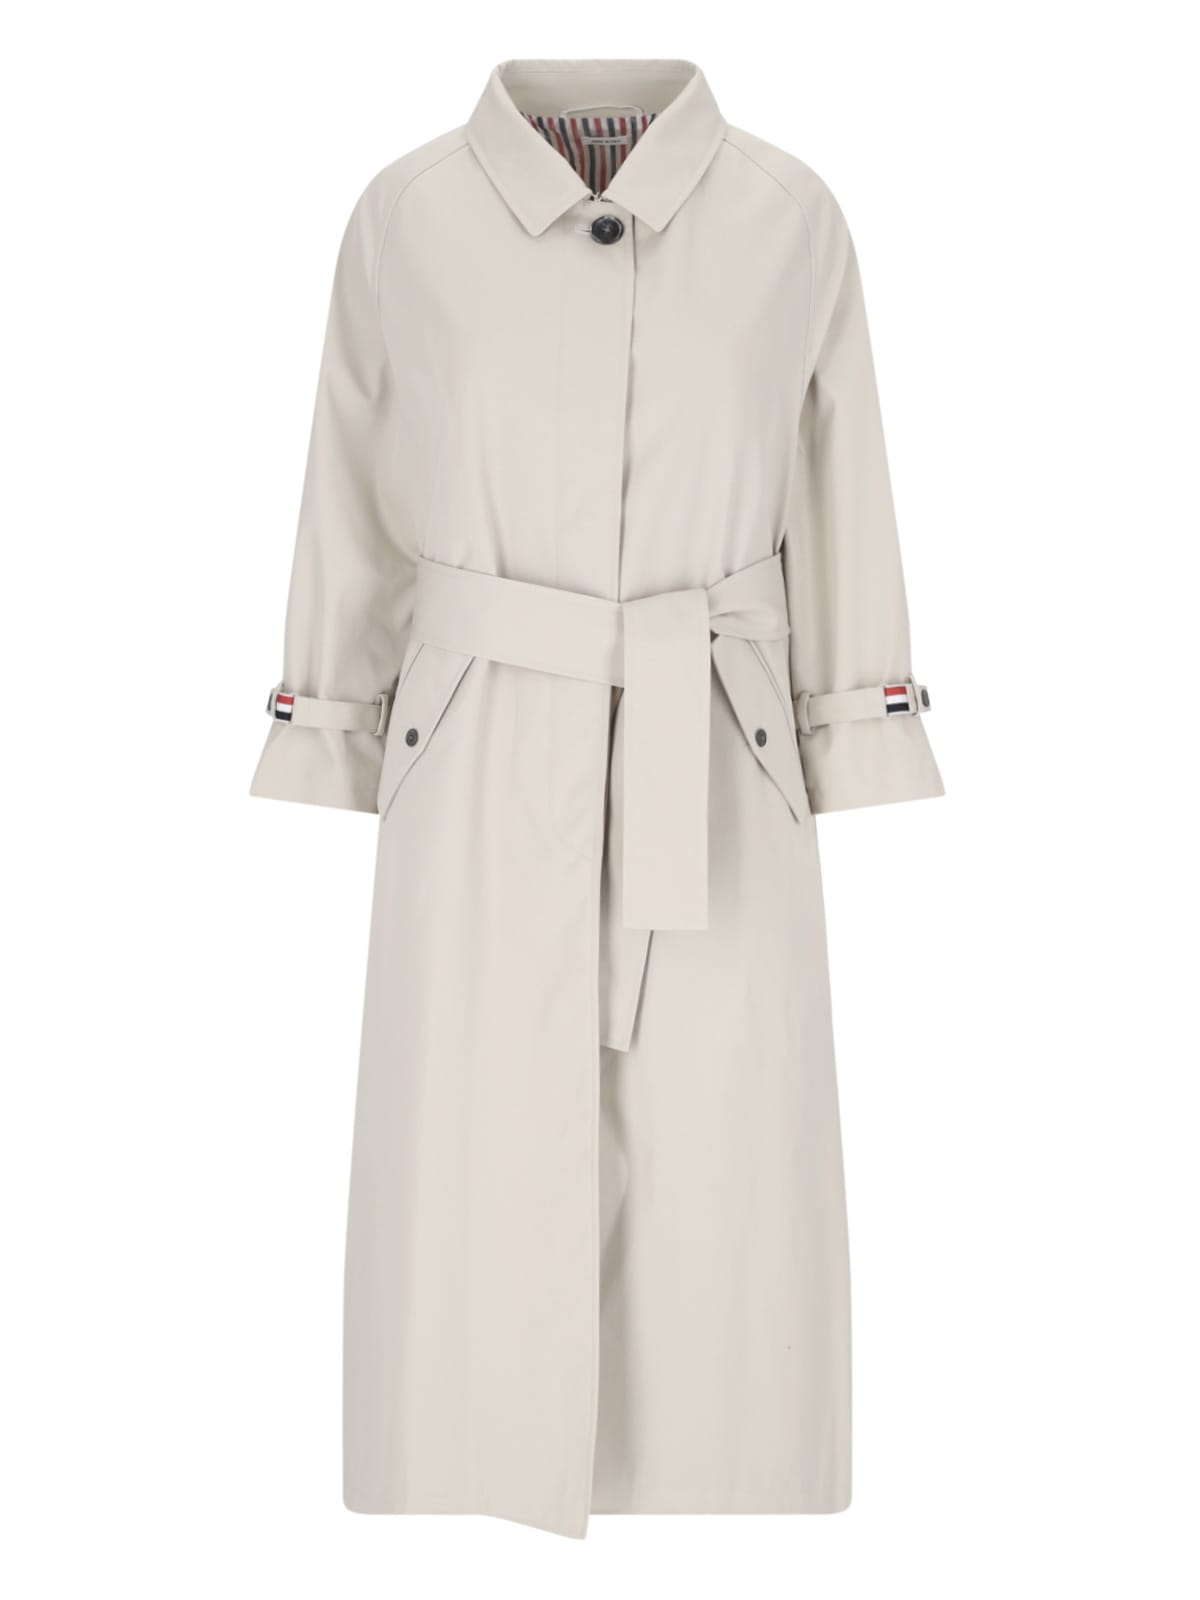 THOM BROWNE SINGLE-BREASTED TRENCH COAT